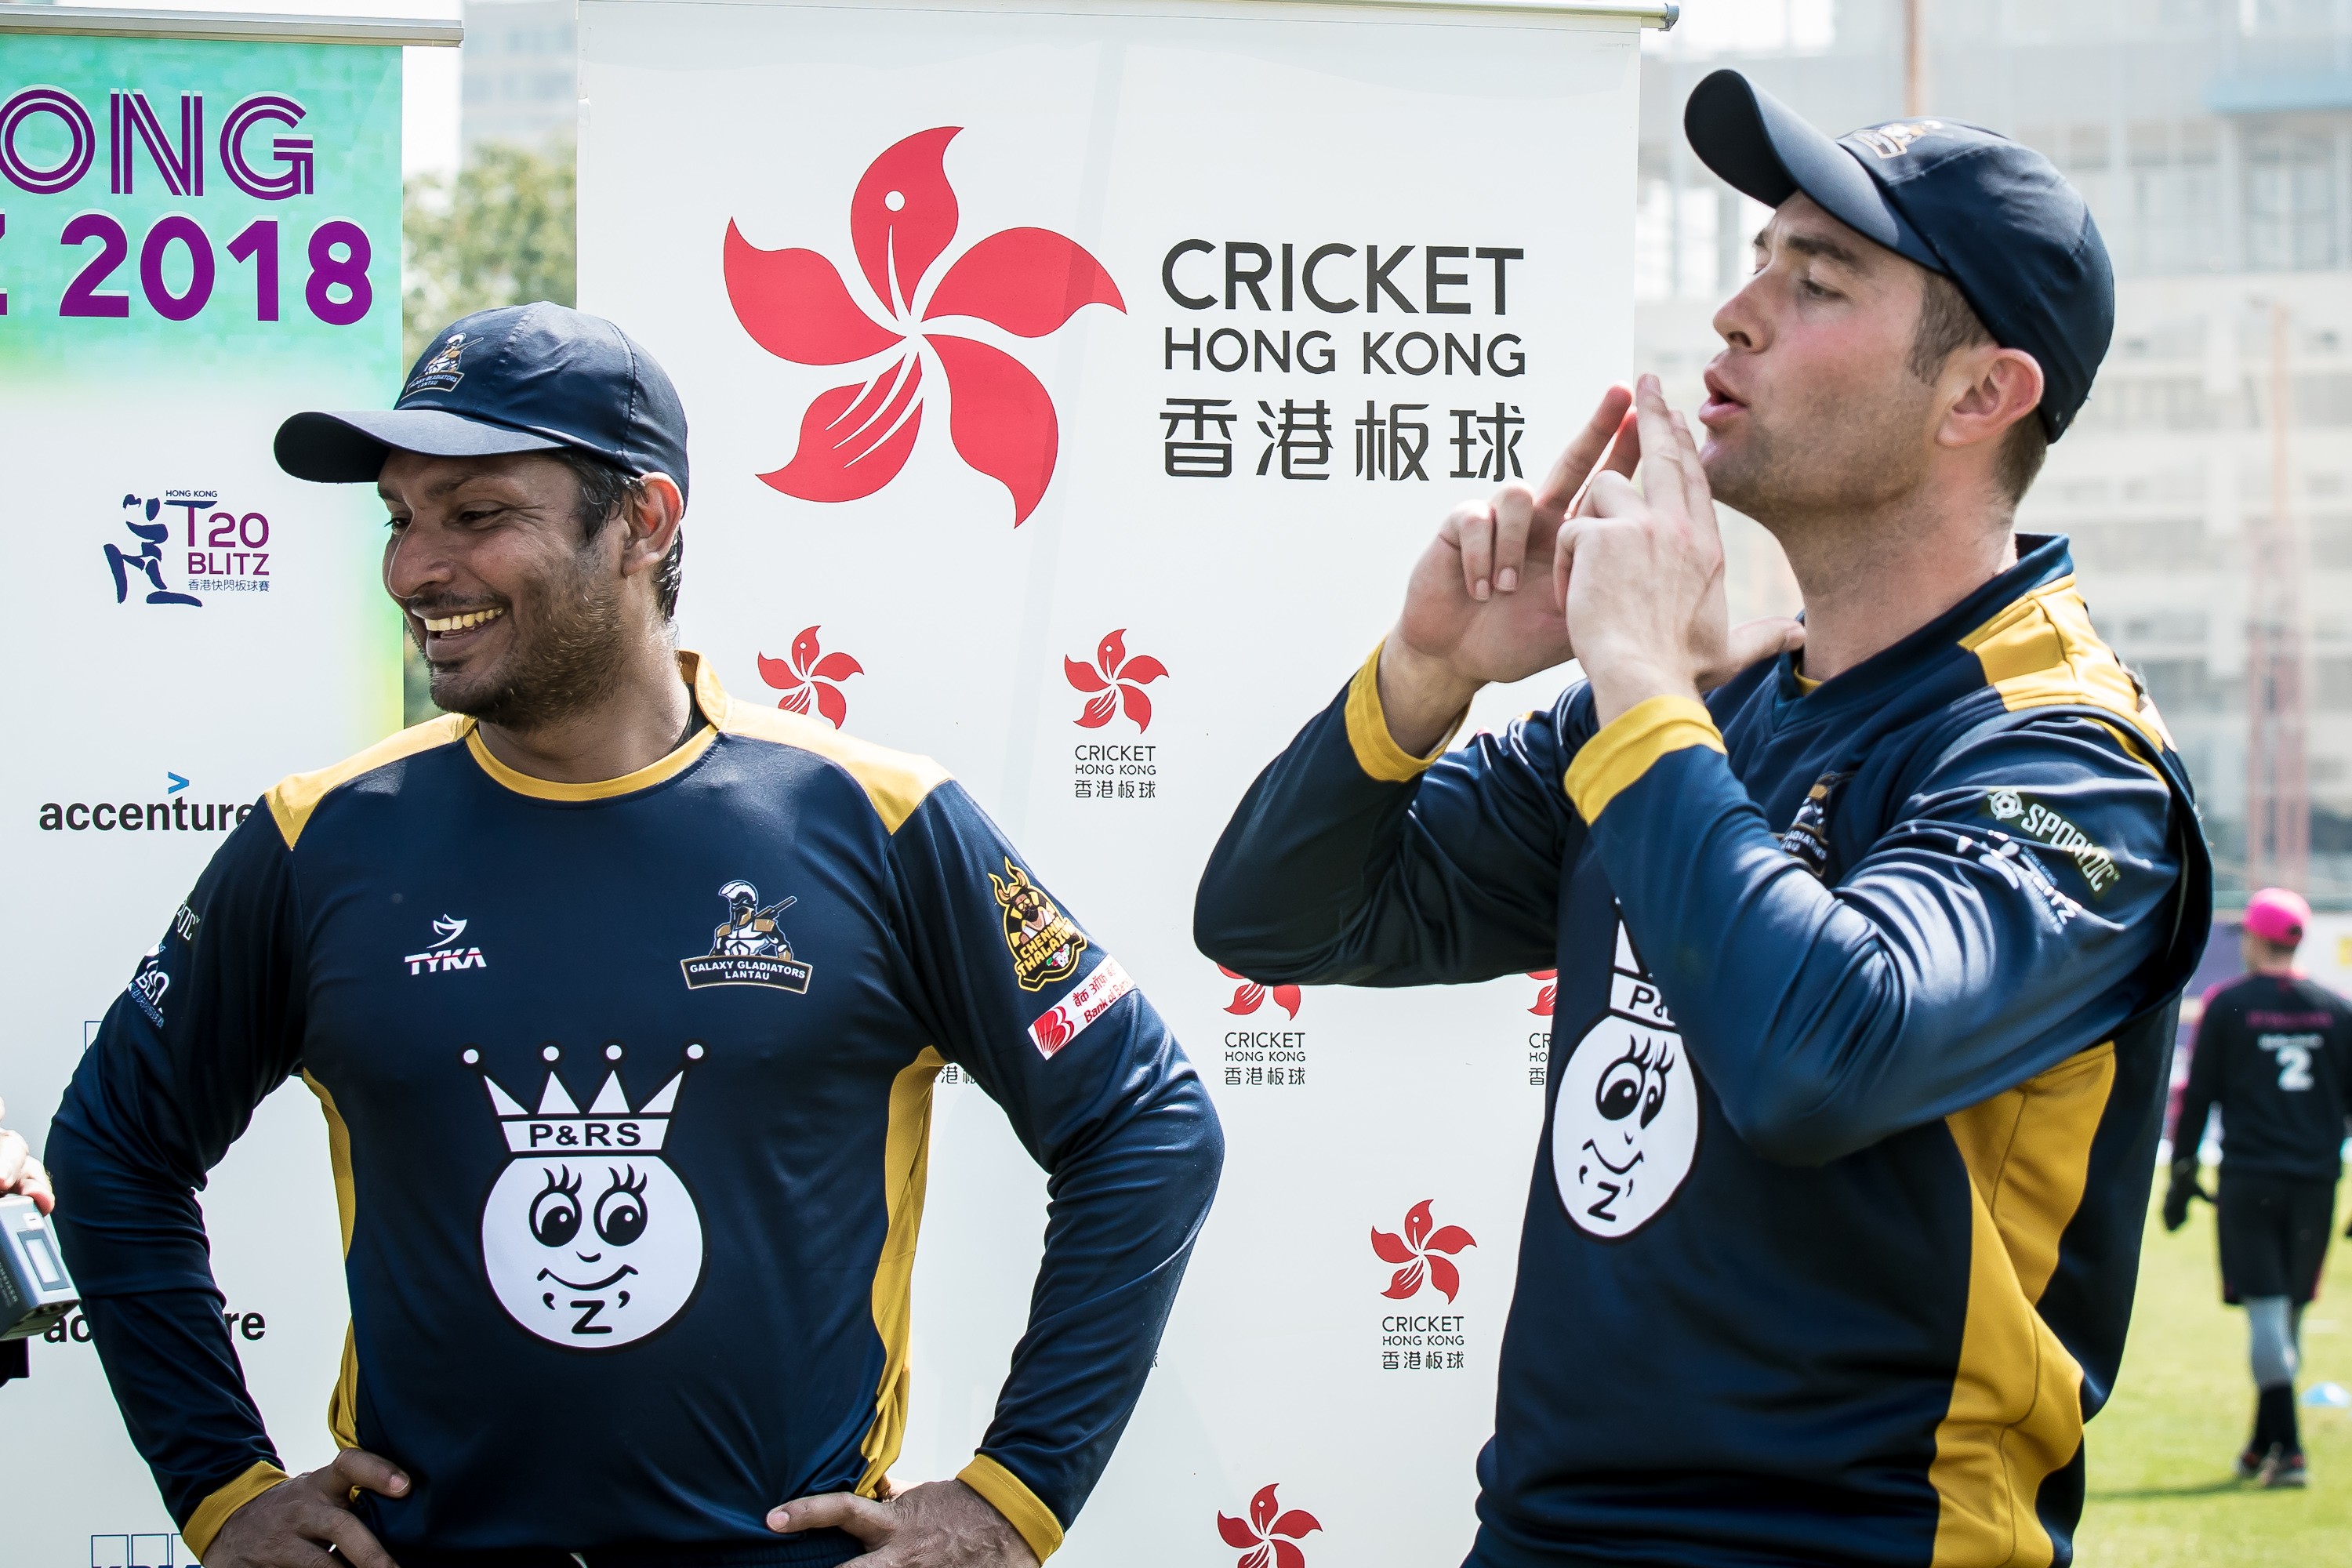 Man of the match Dan Pascoe (right) does his gunman celebration at the post-match ceremony with Kumar Sangakkara. Photo: Ike Images